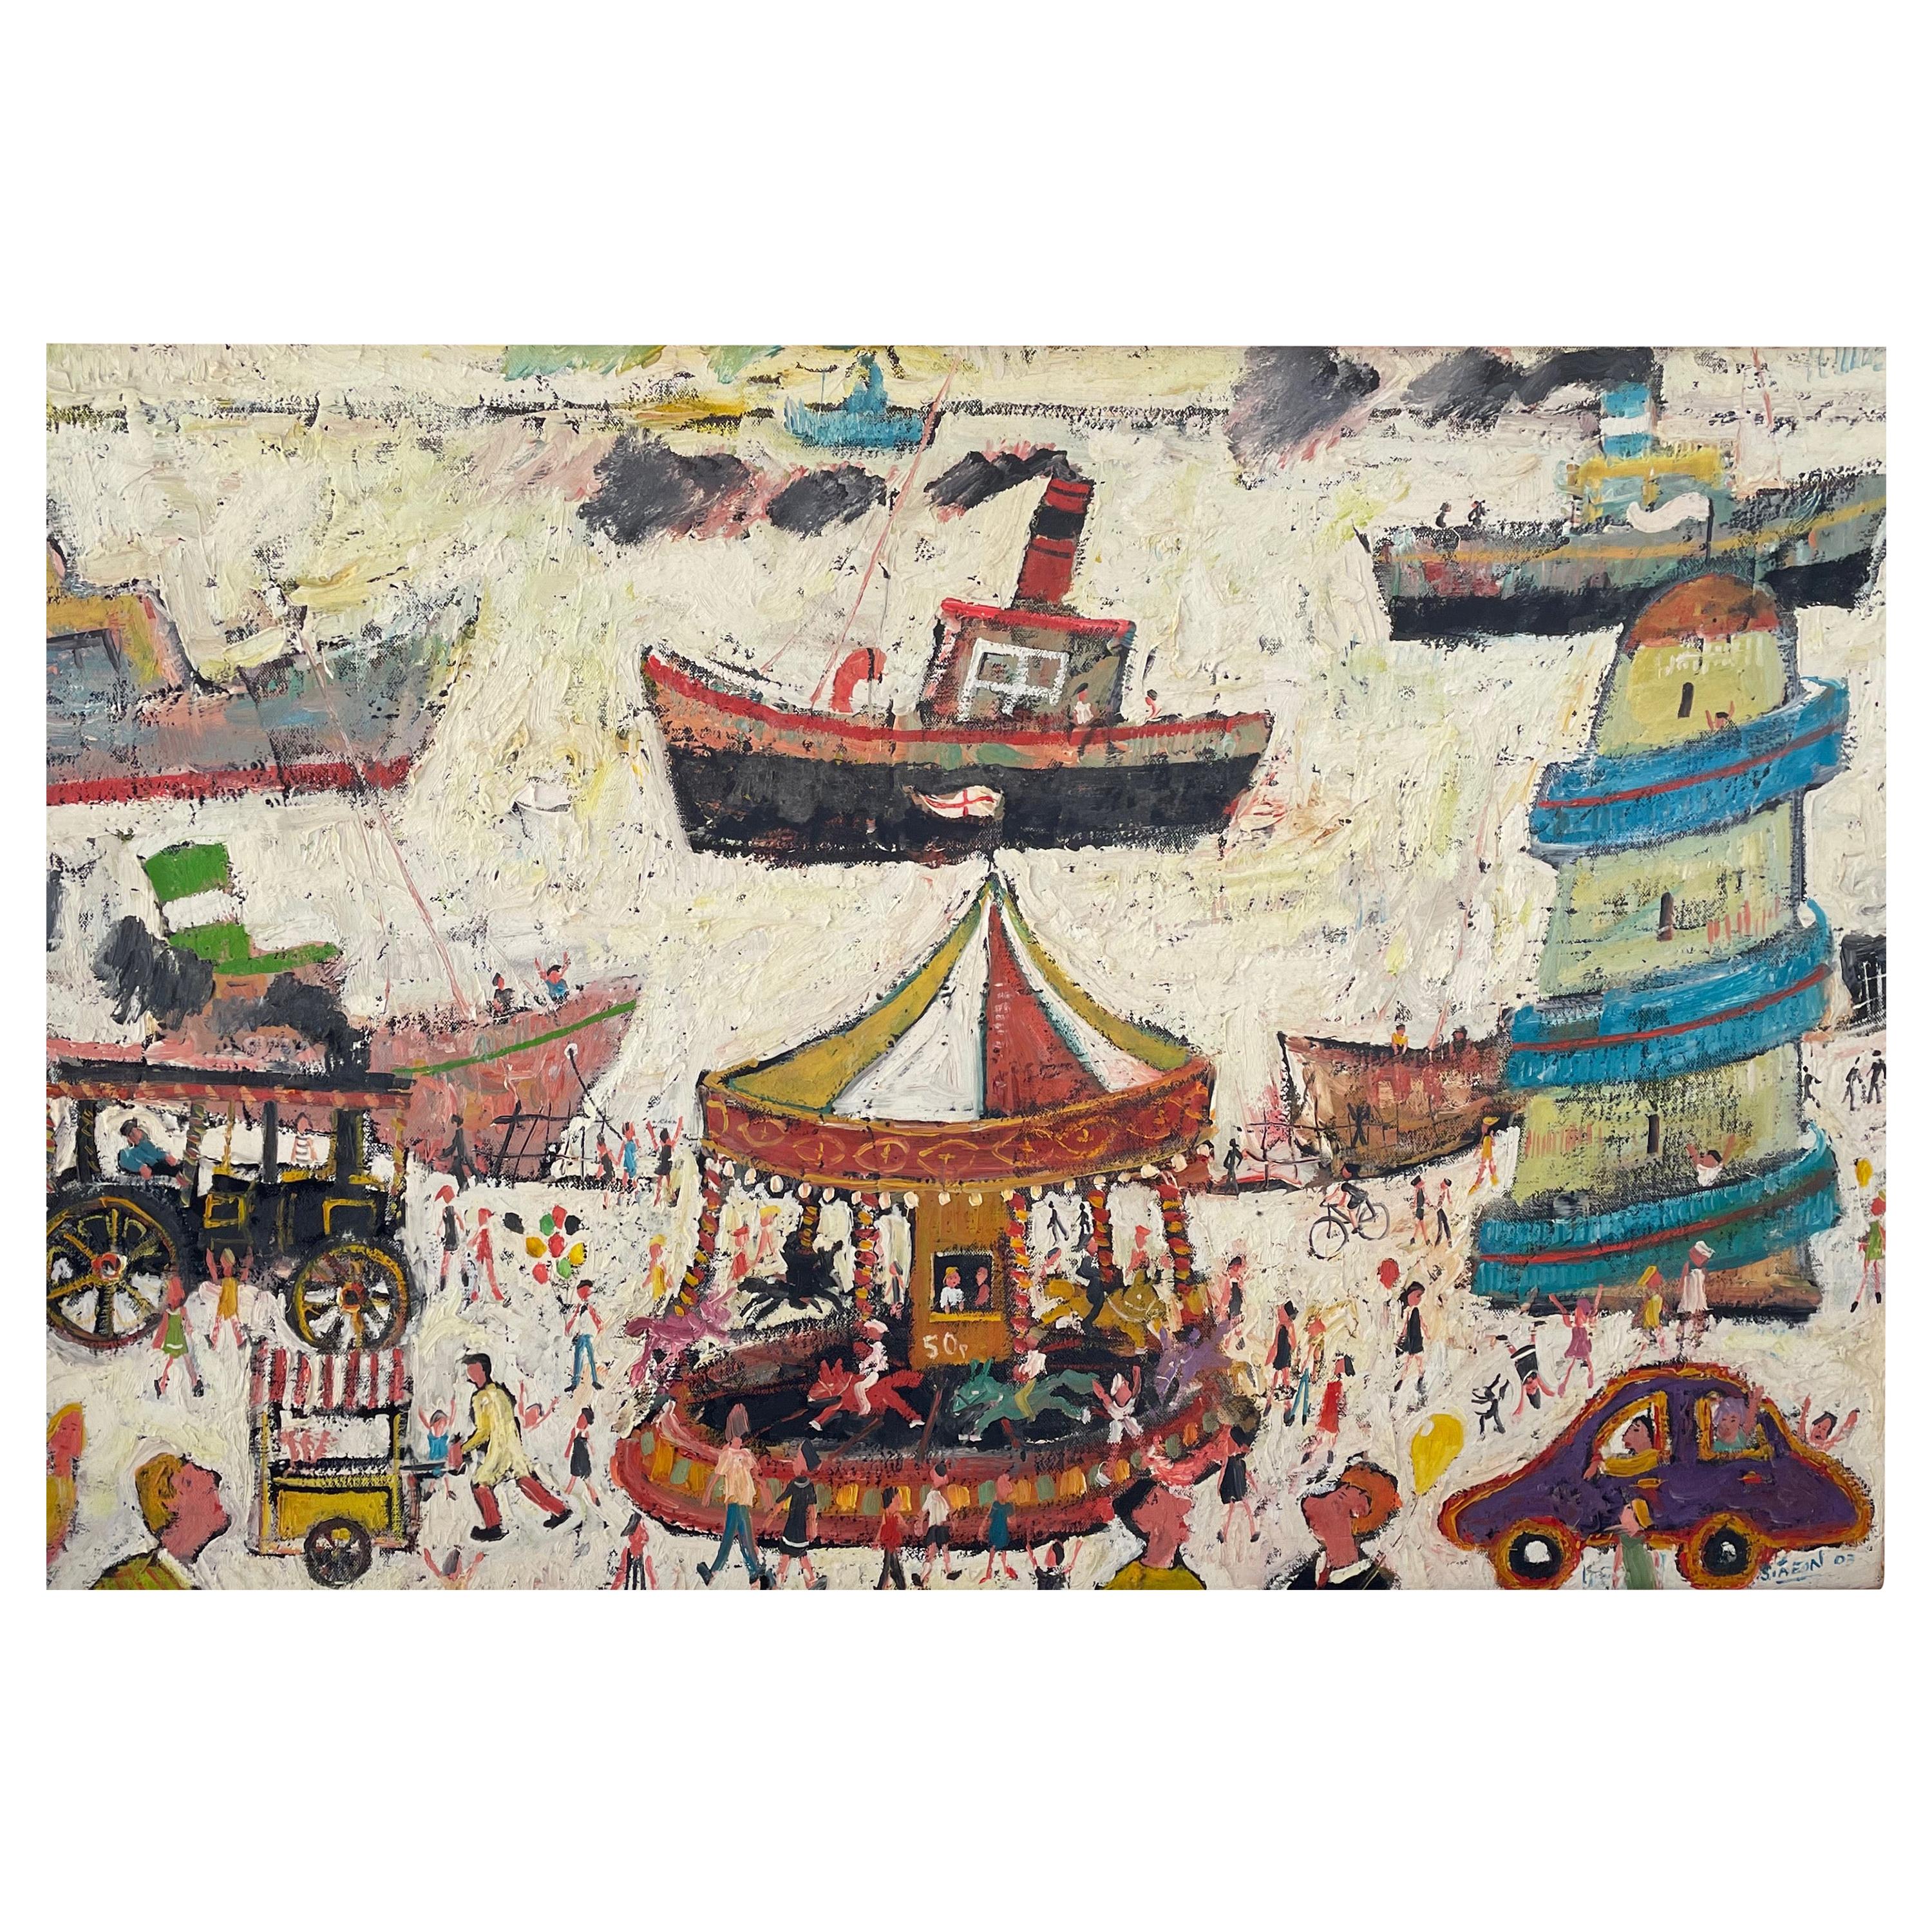 Fun Fair on the Harbour Wall, Contemporary Figurative Oil Painting For Sale